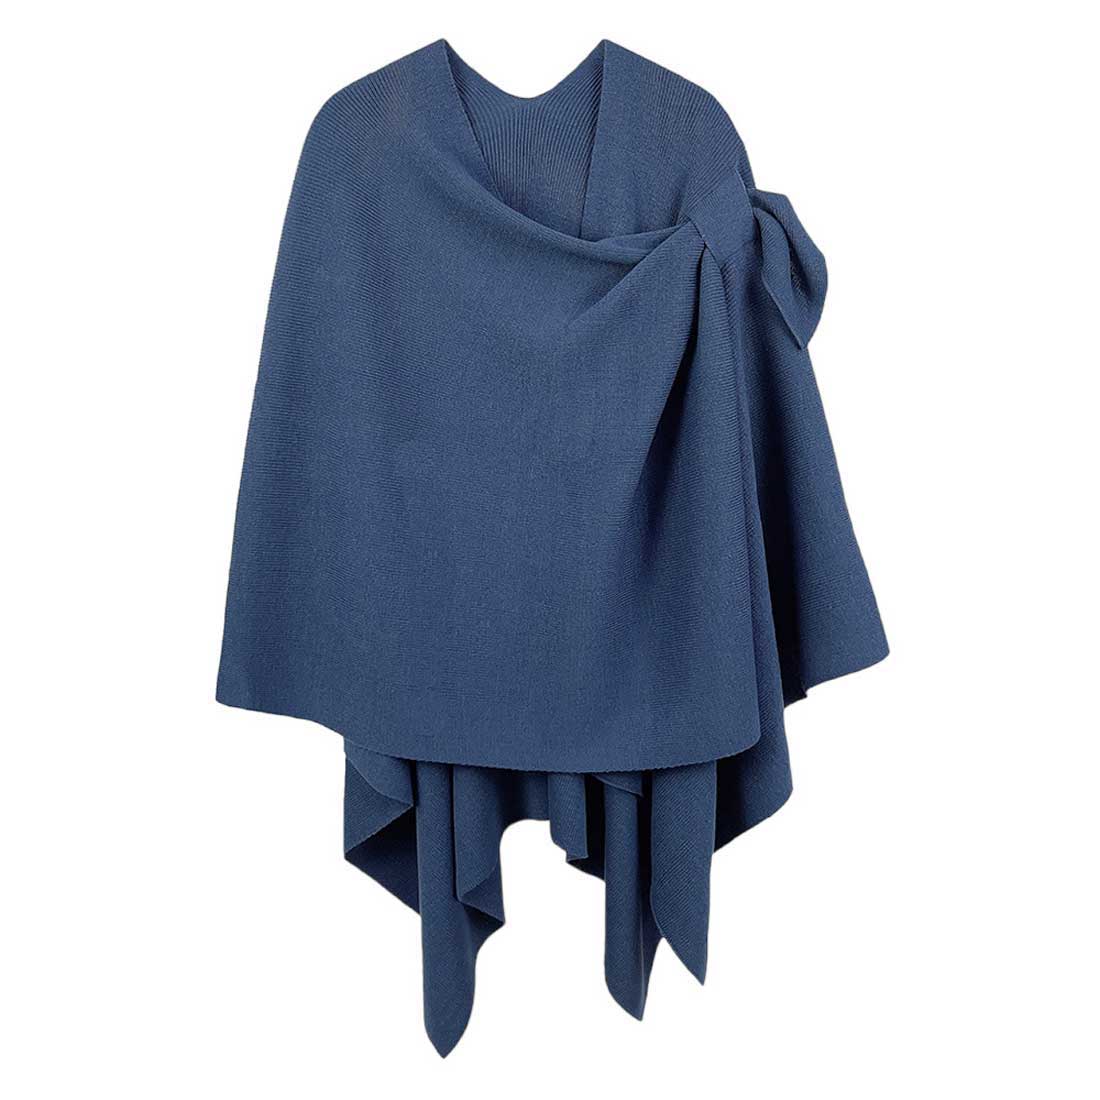 Blue Shoulder Strap Solid Ruana Poncho, with the latest trend in ladies outfit cover-up! the high-quality bling border solid neck poncho is soft, comfortable, and warm but lightweight. Stay protected from the chilly weather while taking your elegant looks to a whole new level with an eye-catching, luxurious outfit women! 